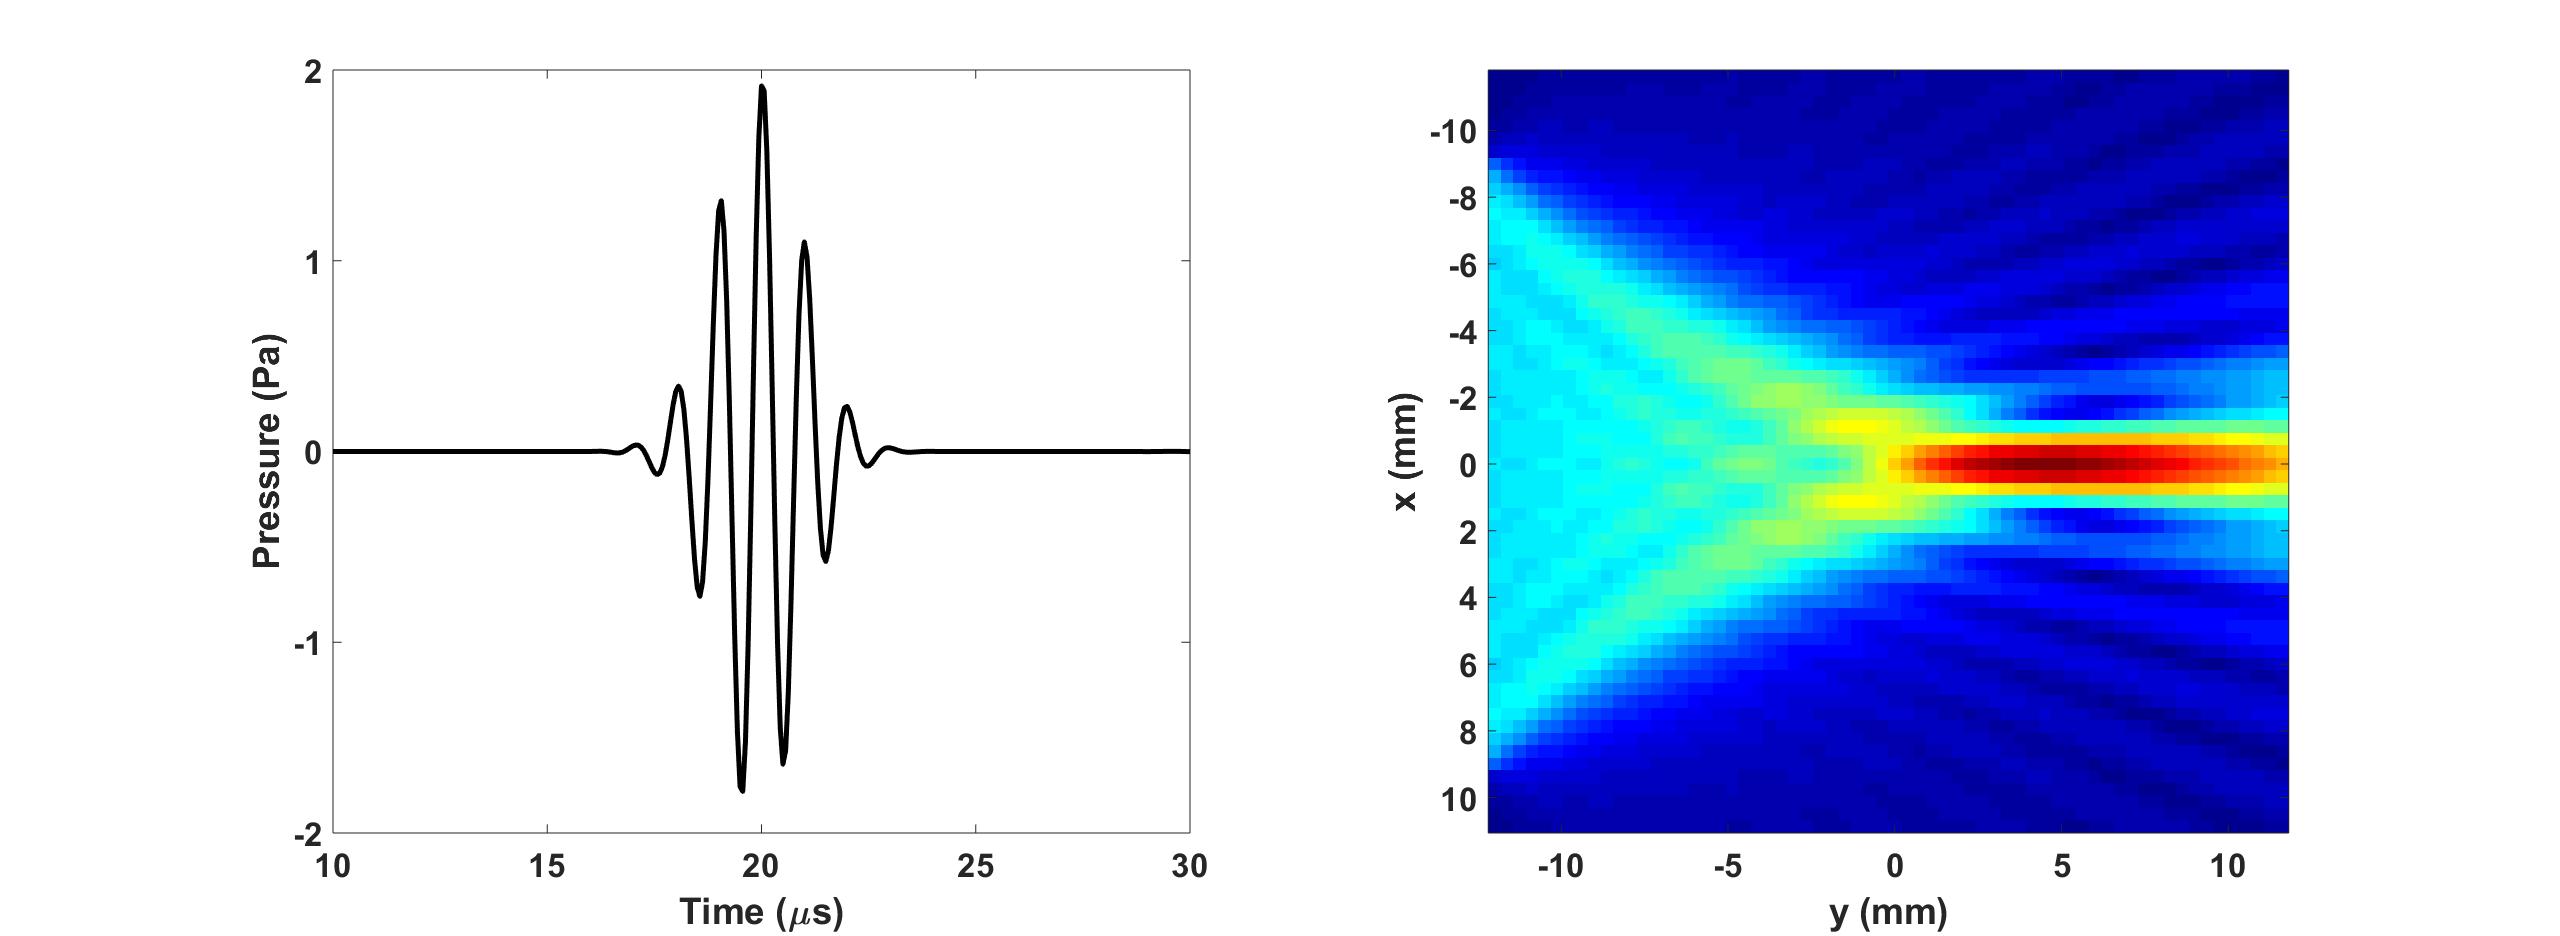 (a) Time-domain singal recorded at the transducer focus                                                    (b) Fundamental pressure distribution through the sensor mask